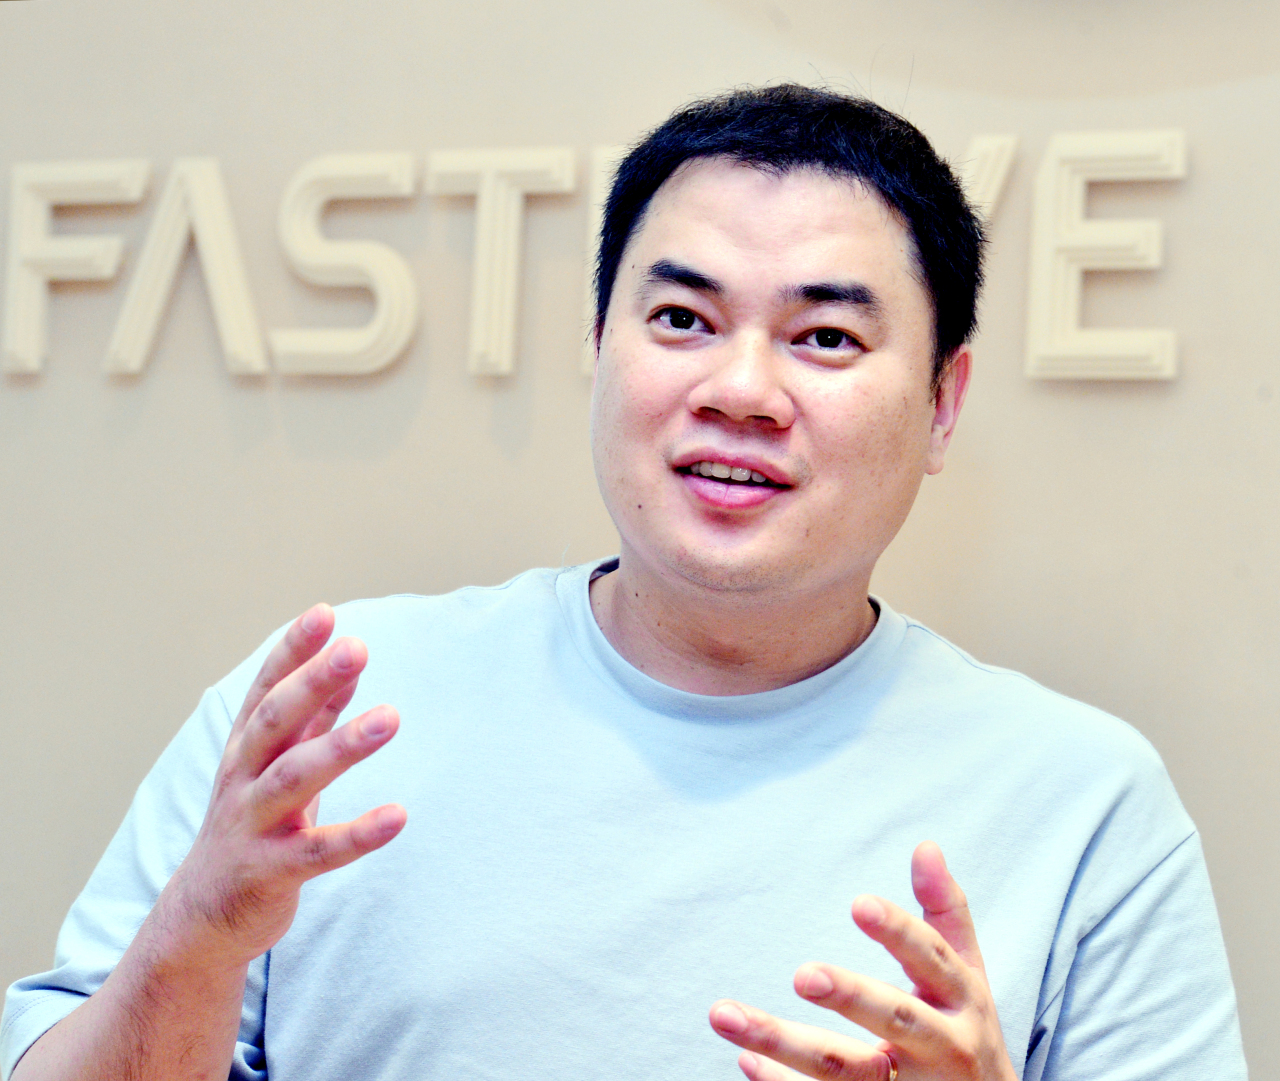 FastFive CEO Kim Dae-il speaks in an interview with The Korea Herald. (Park Hyun-koo/The Korea Herald)